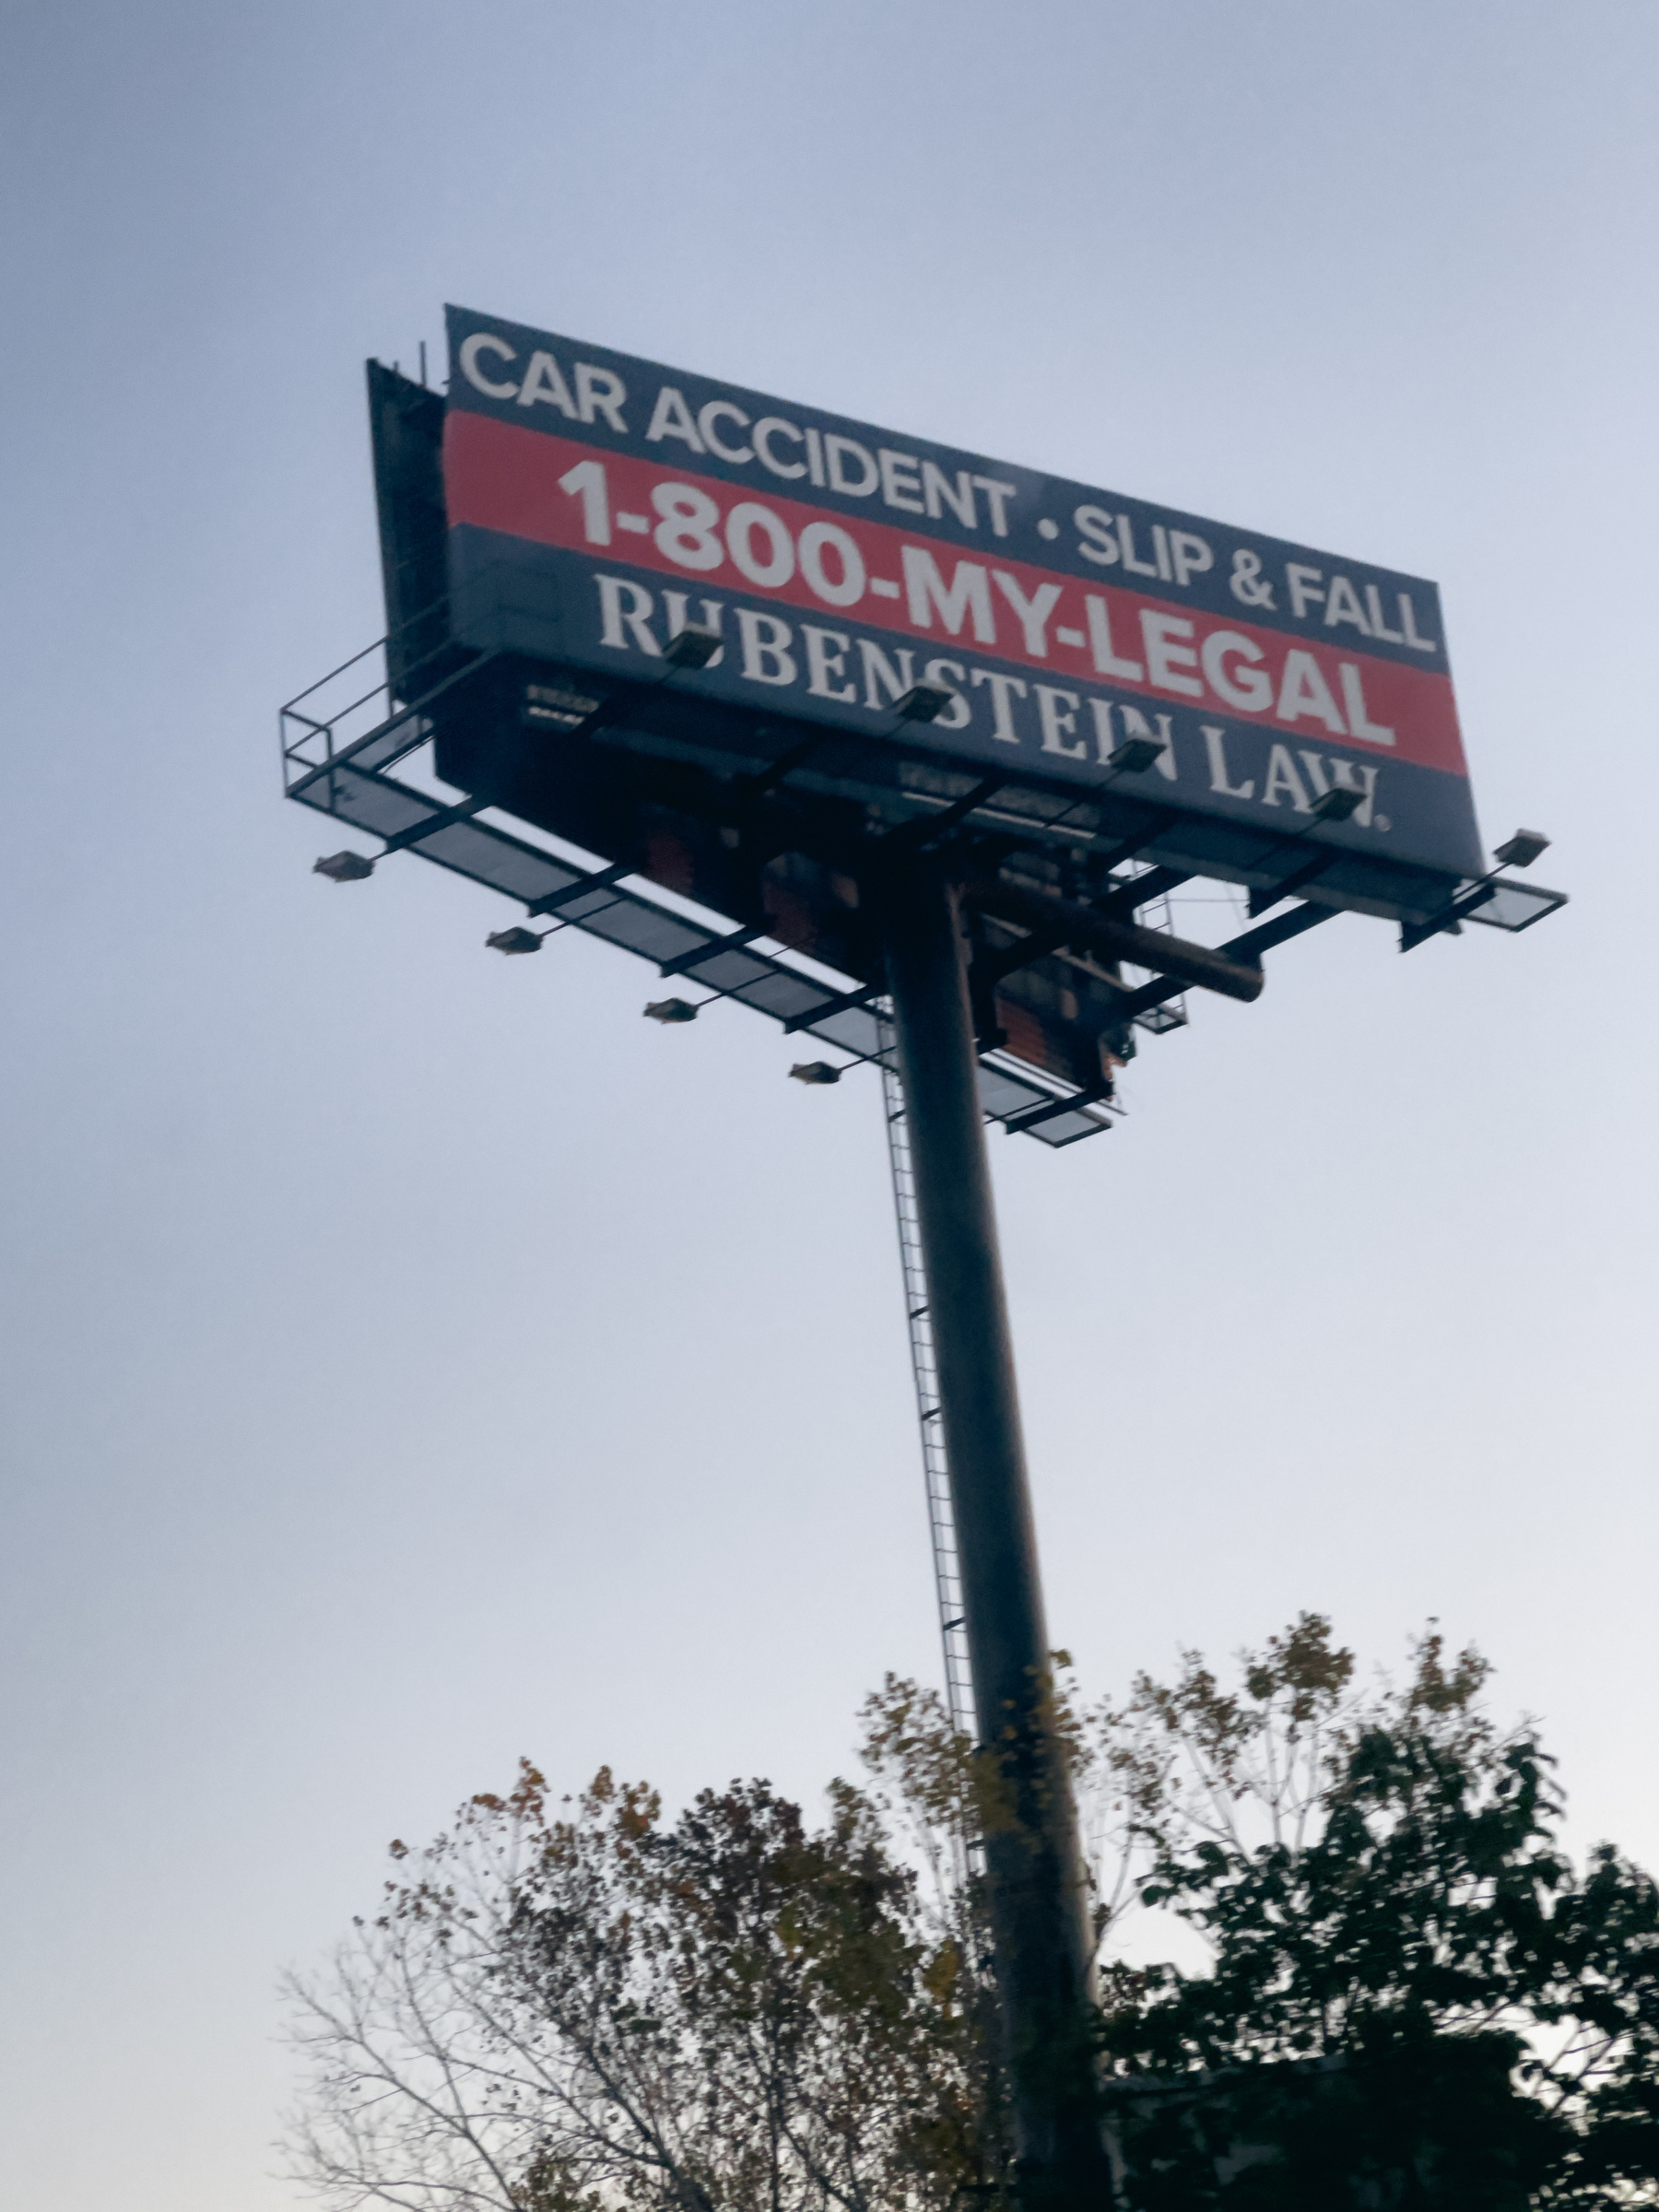 Billboard up on post advertising legal services for car accidents.